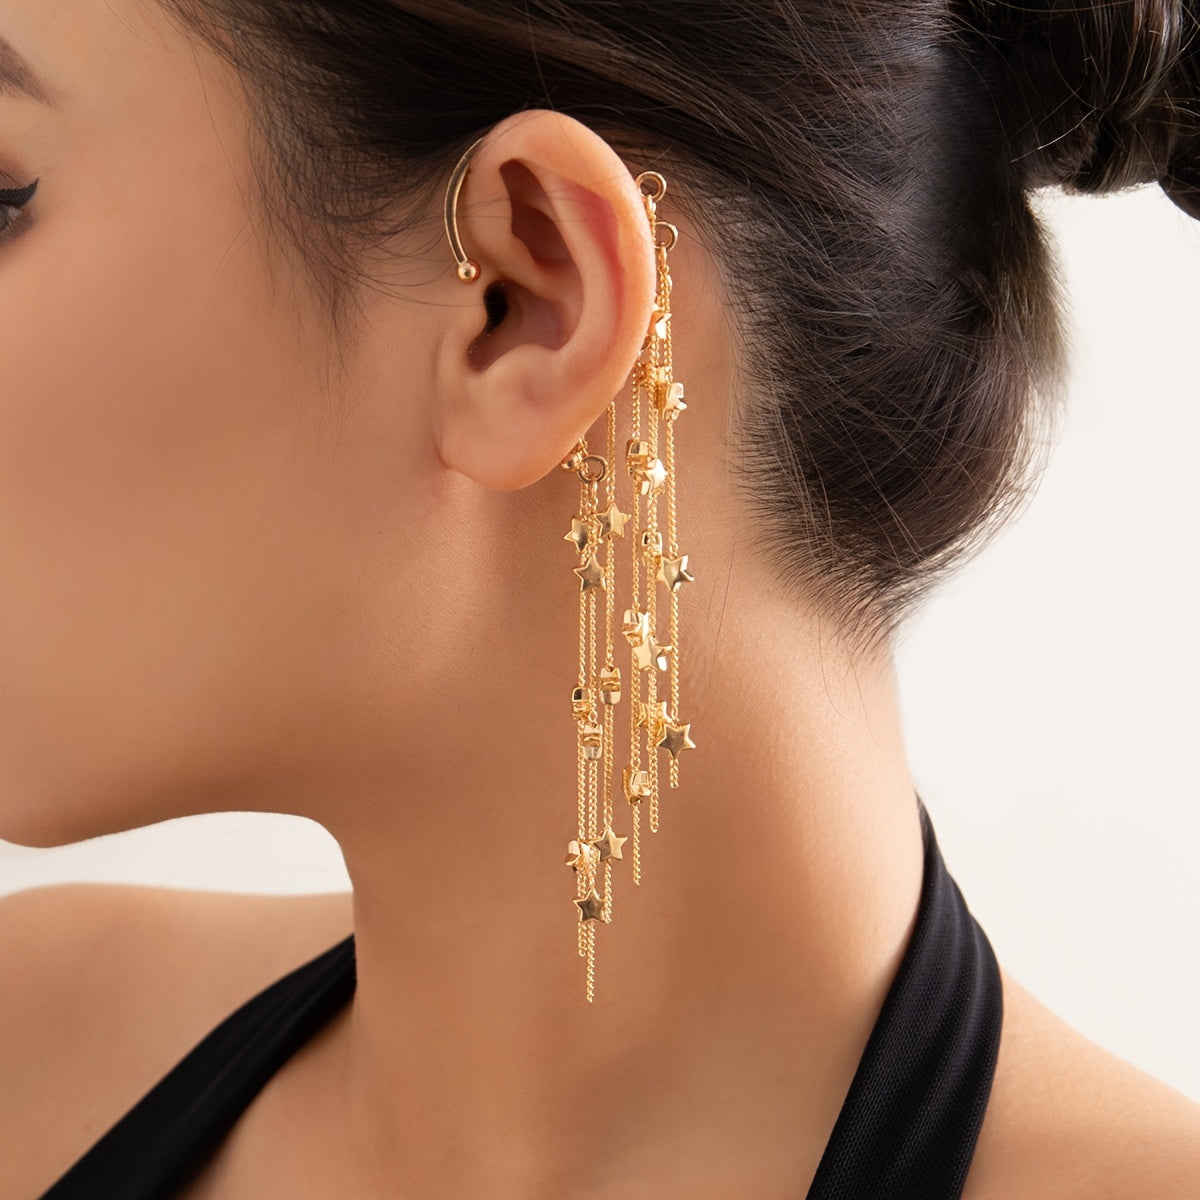 Make a Statement with These Bold & Stylish Star Tassel Earrings!